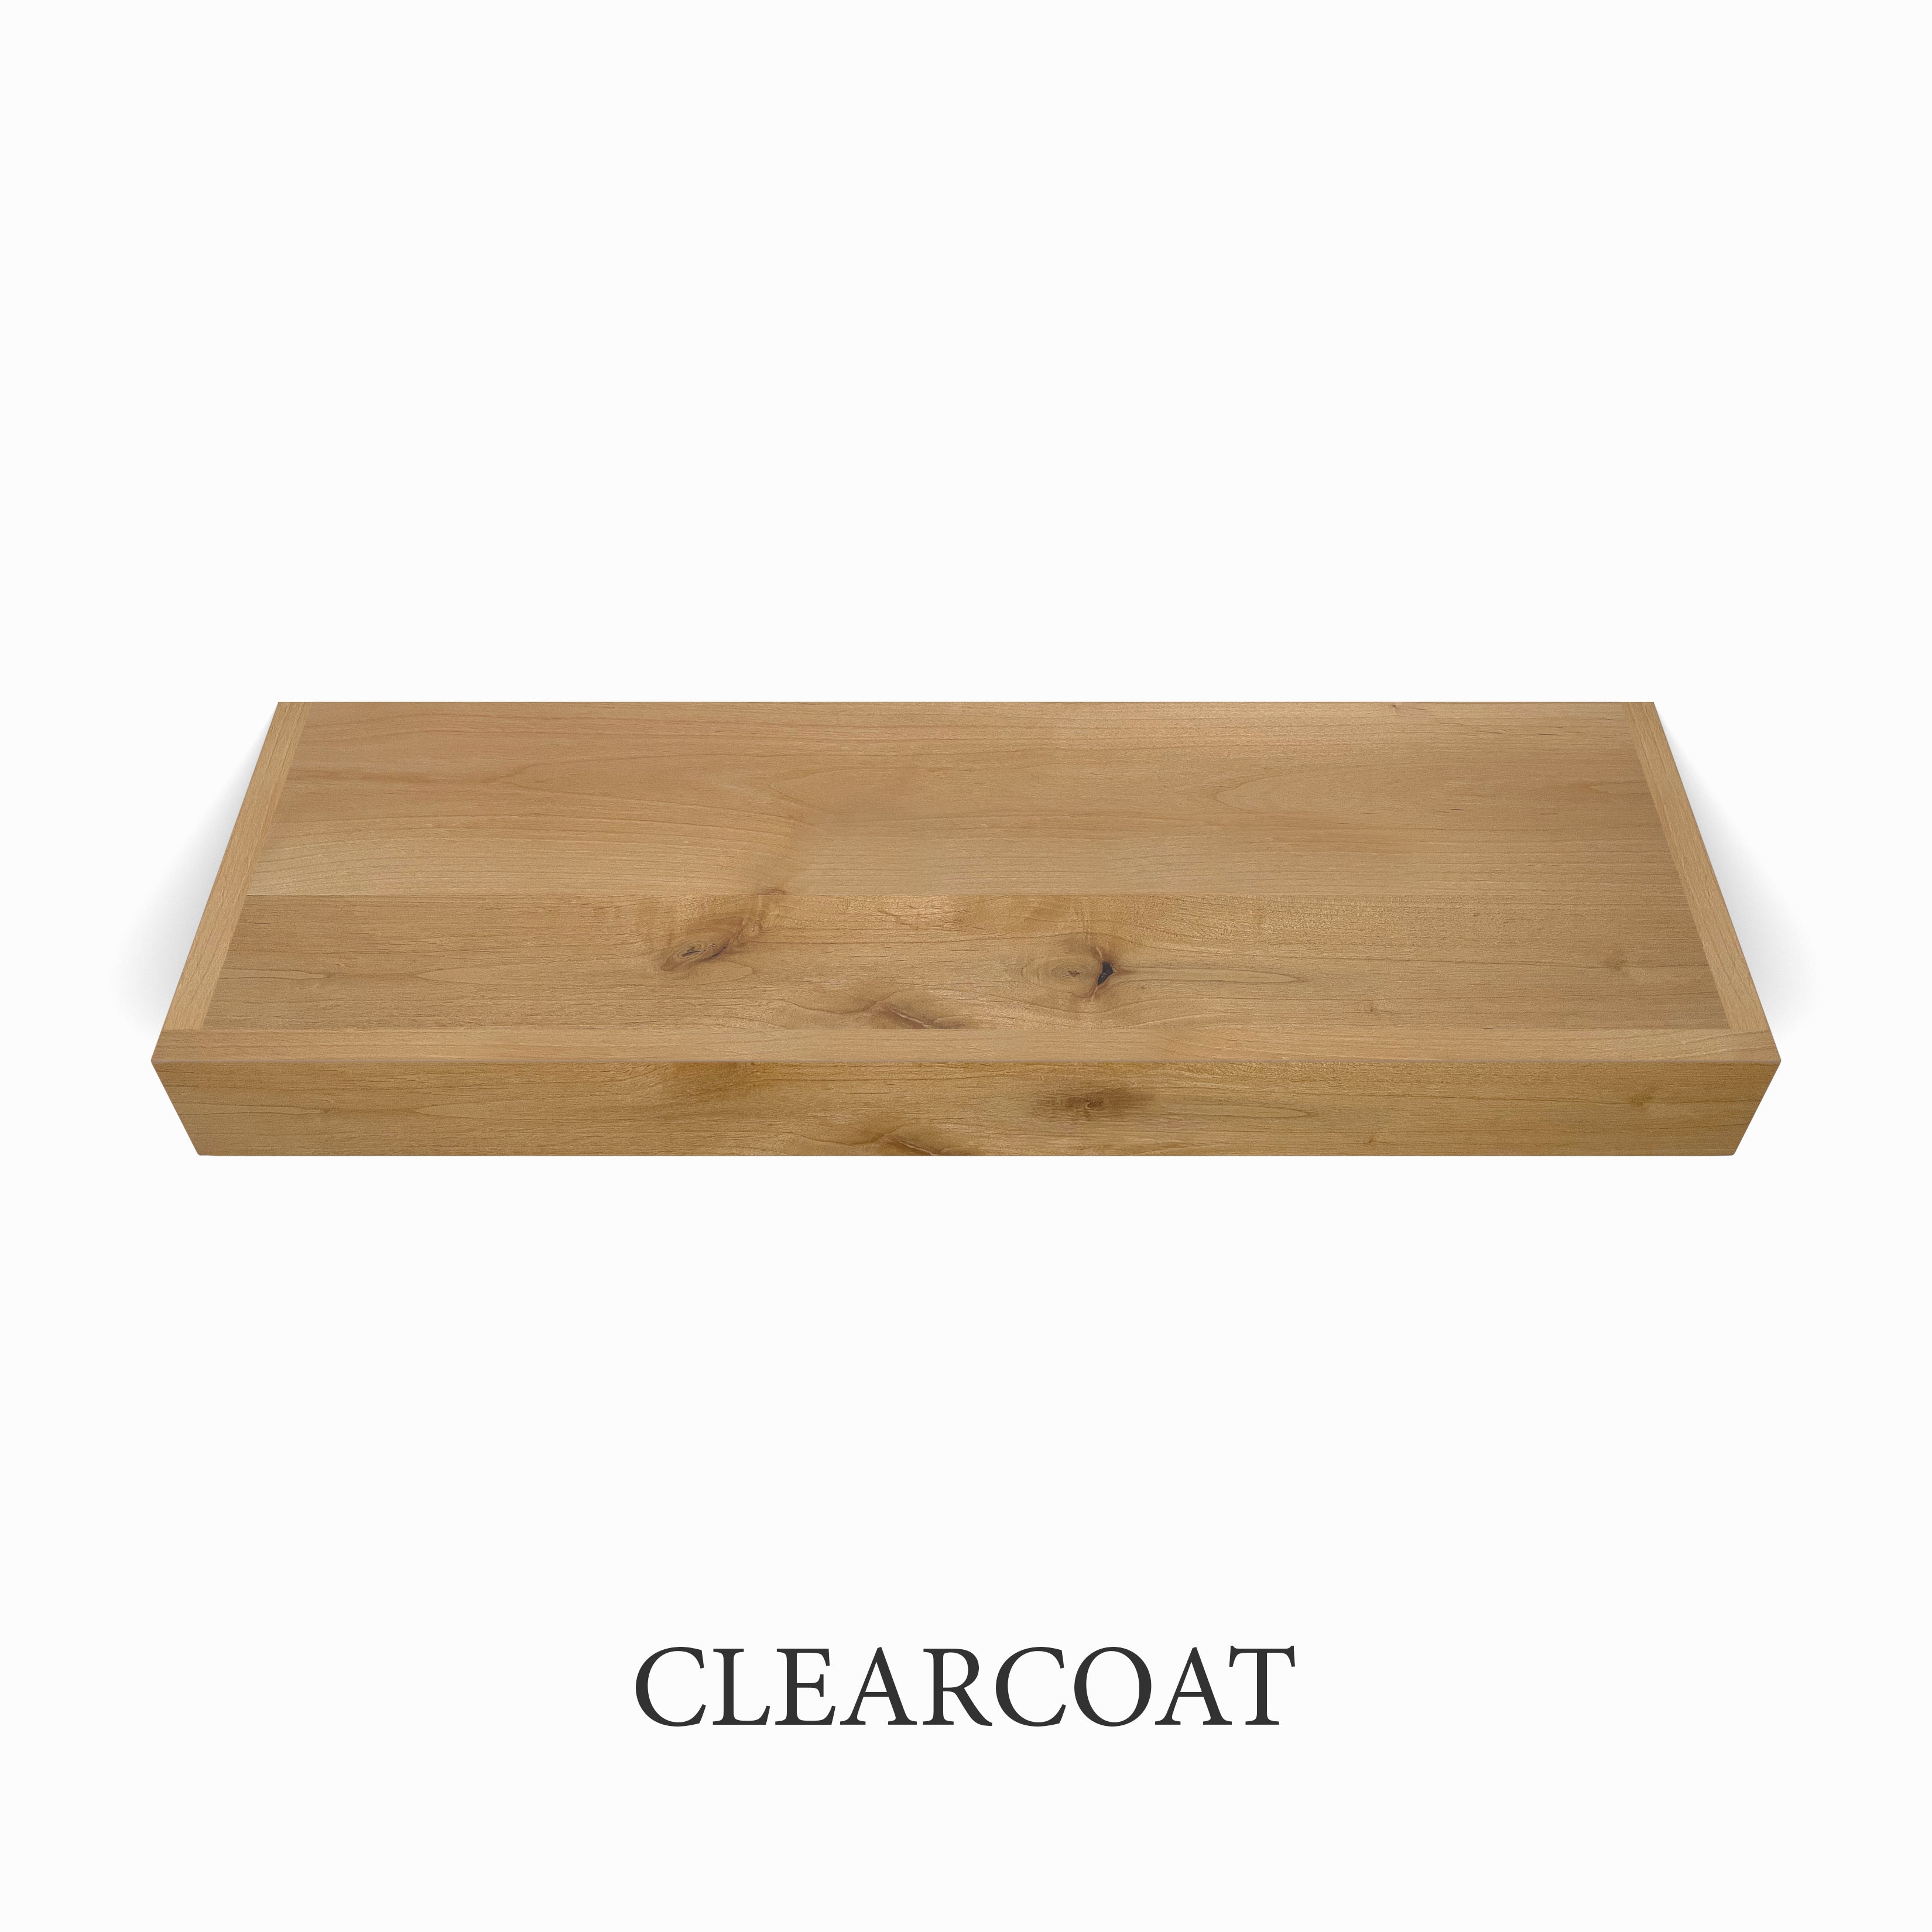 clearcoat Rustic Alder 3 Inch Thick LED Lighted Floating Shelf - Hardwired